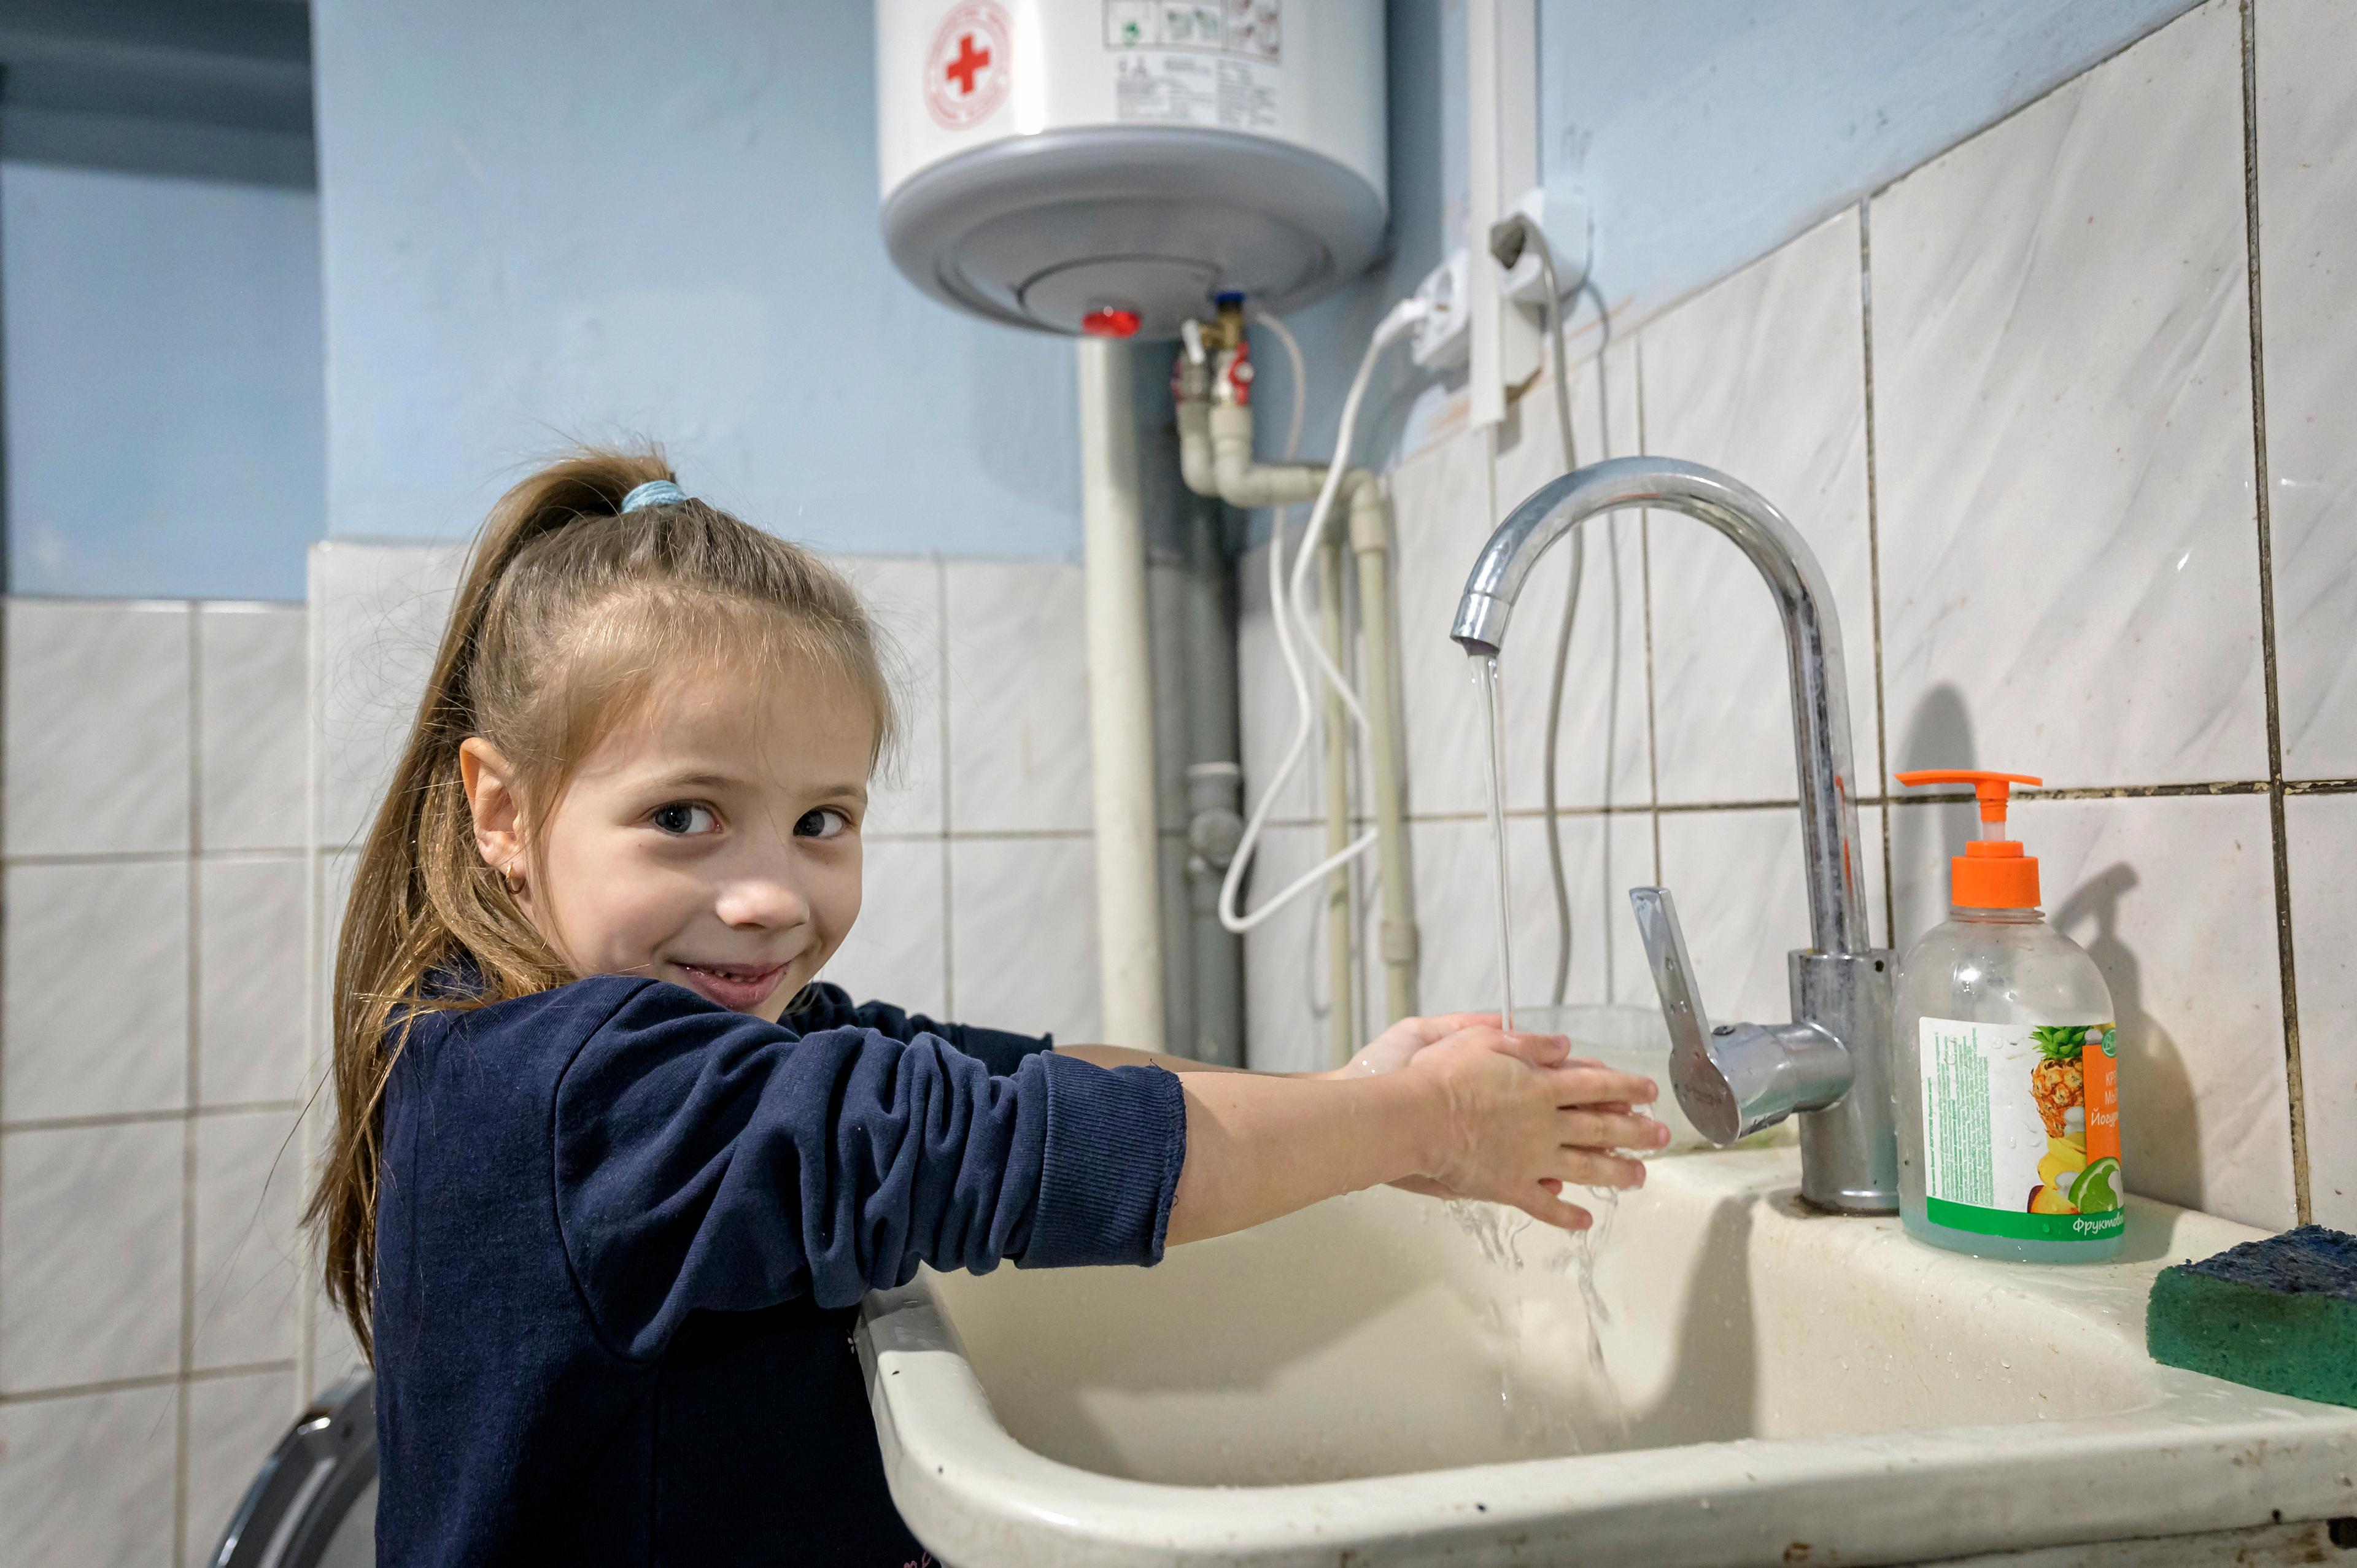 Six-year-old Elisabeta washes her hands in an emergency shelter in western Ukraine.